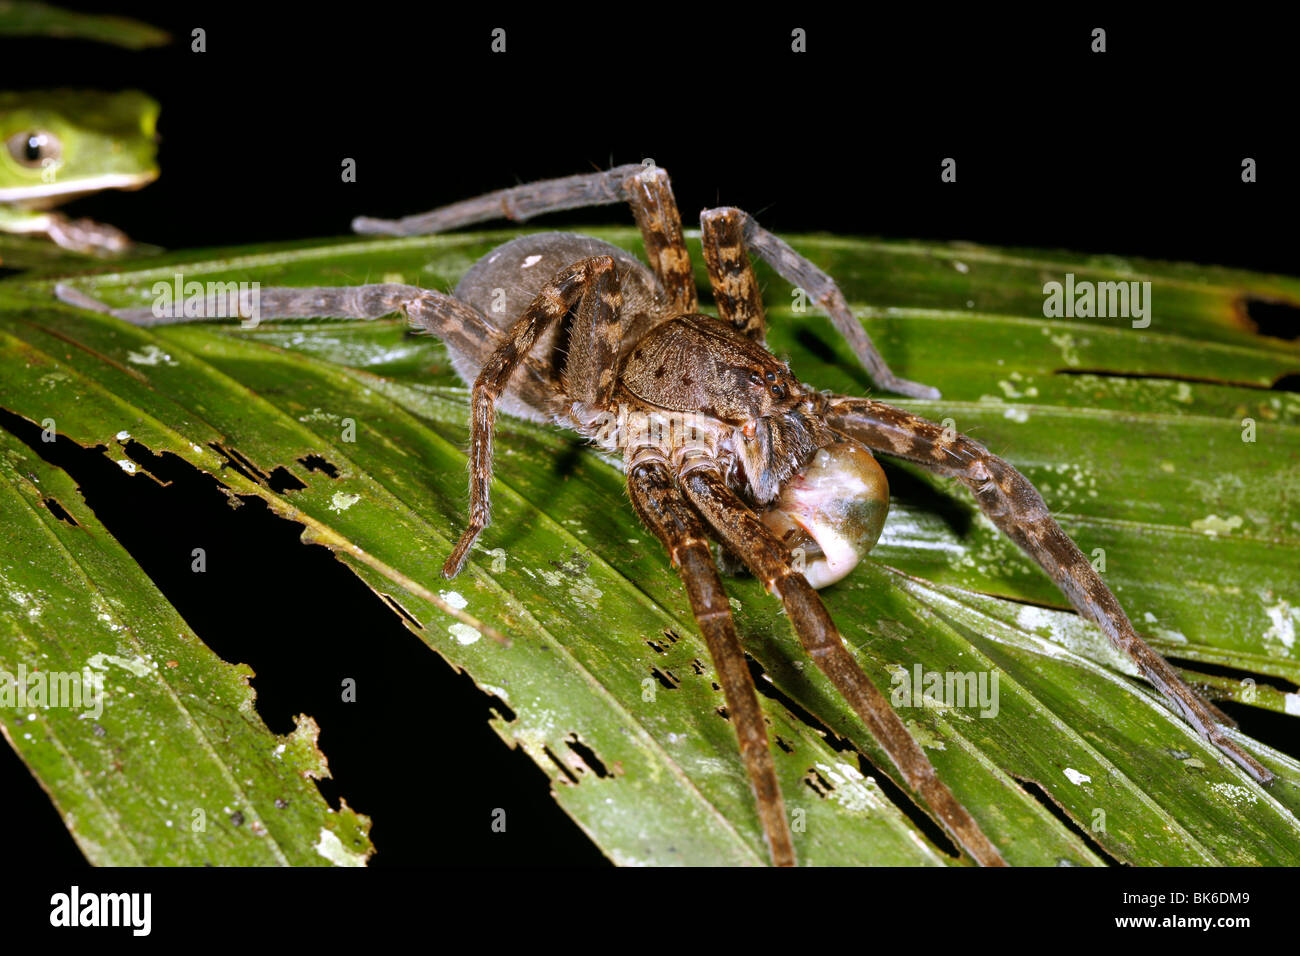 Spider eating a frog while another frog looks on. In the Peruvian Amazon Stock Photo